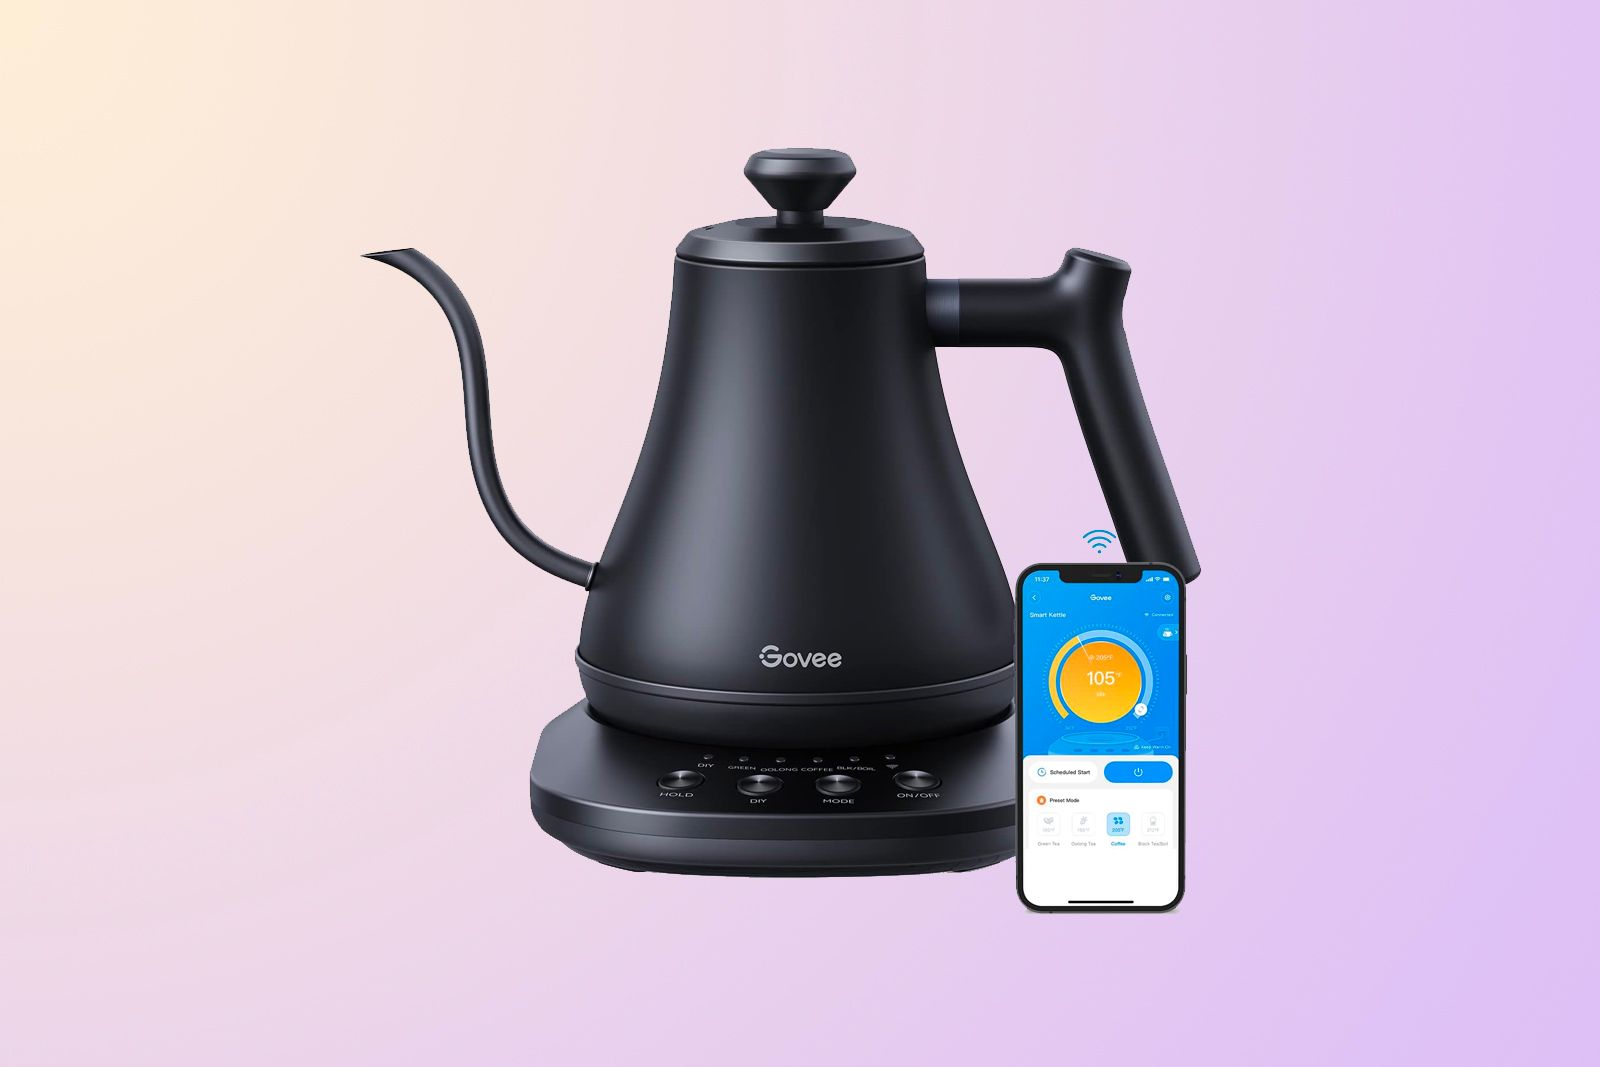 Govee Smart Wifi Alexa Kettle  This Did NOT End Well! 